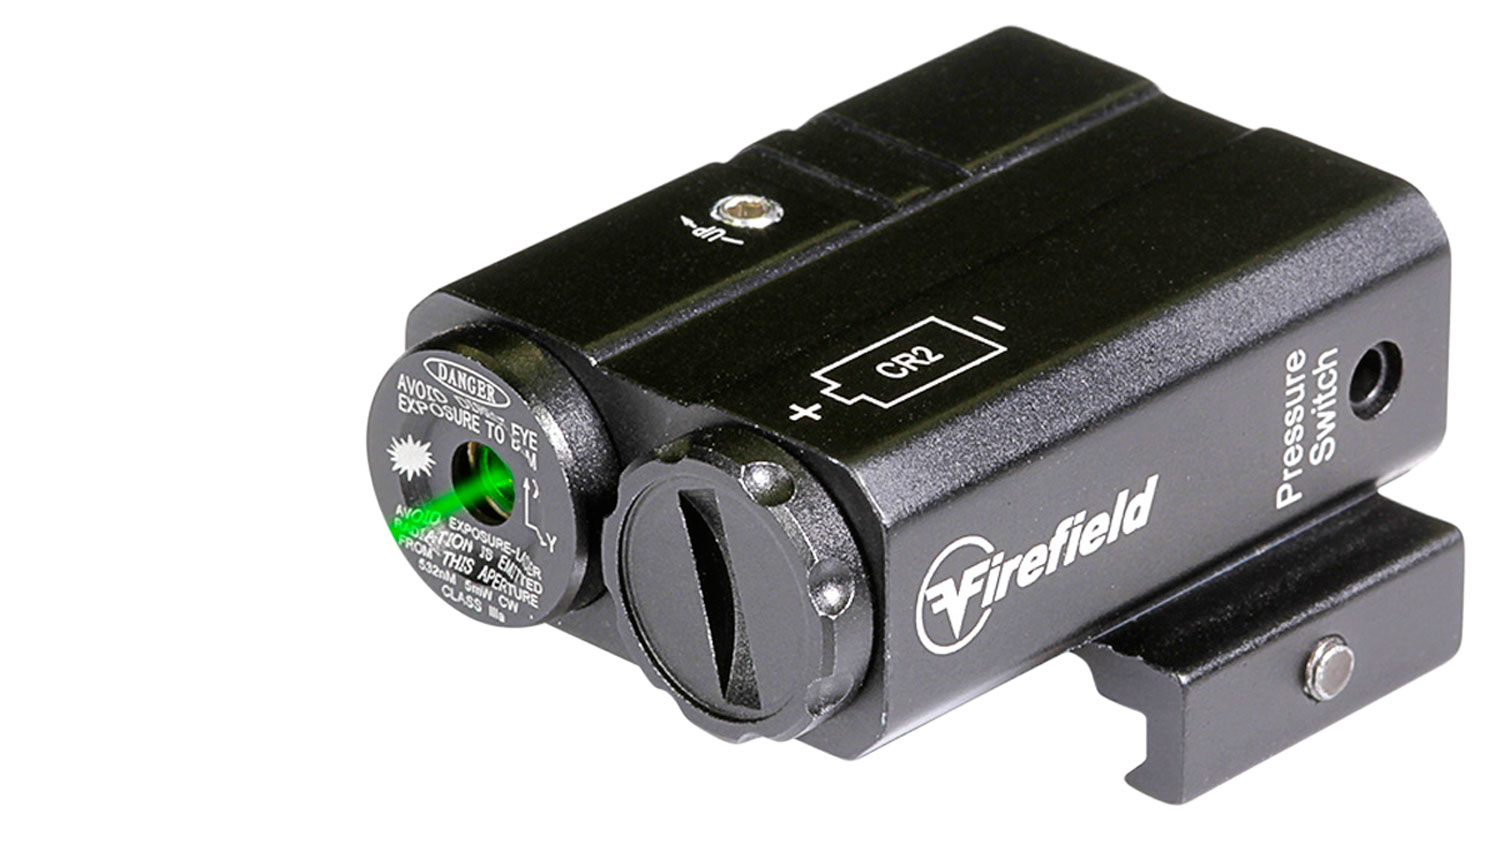 Firefield FF25007 Charge  5mW Green Laser 532nM Wavelength (20 yds Day/300 yds Night Range) Matte Black Finish for AR-Platform Includes Pressure Pad & Battery